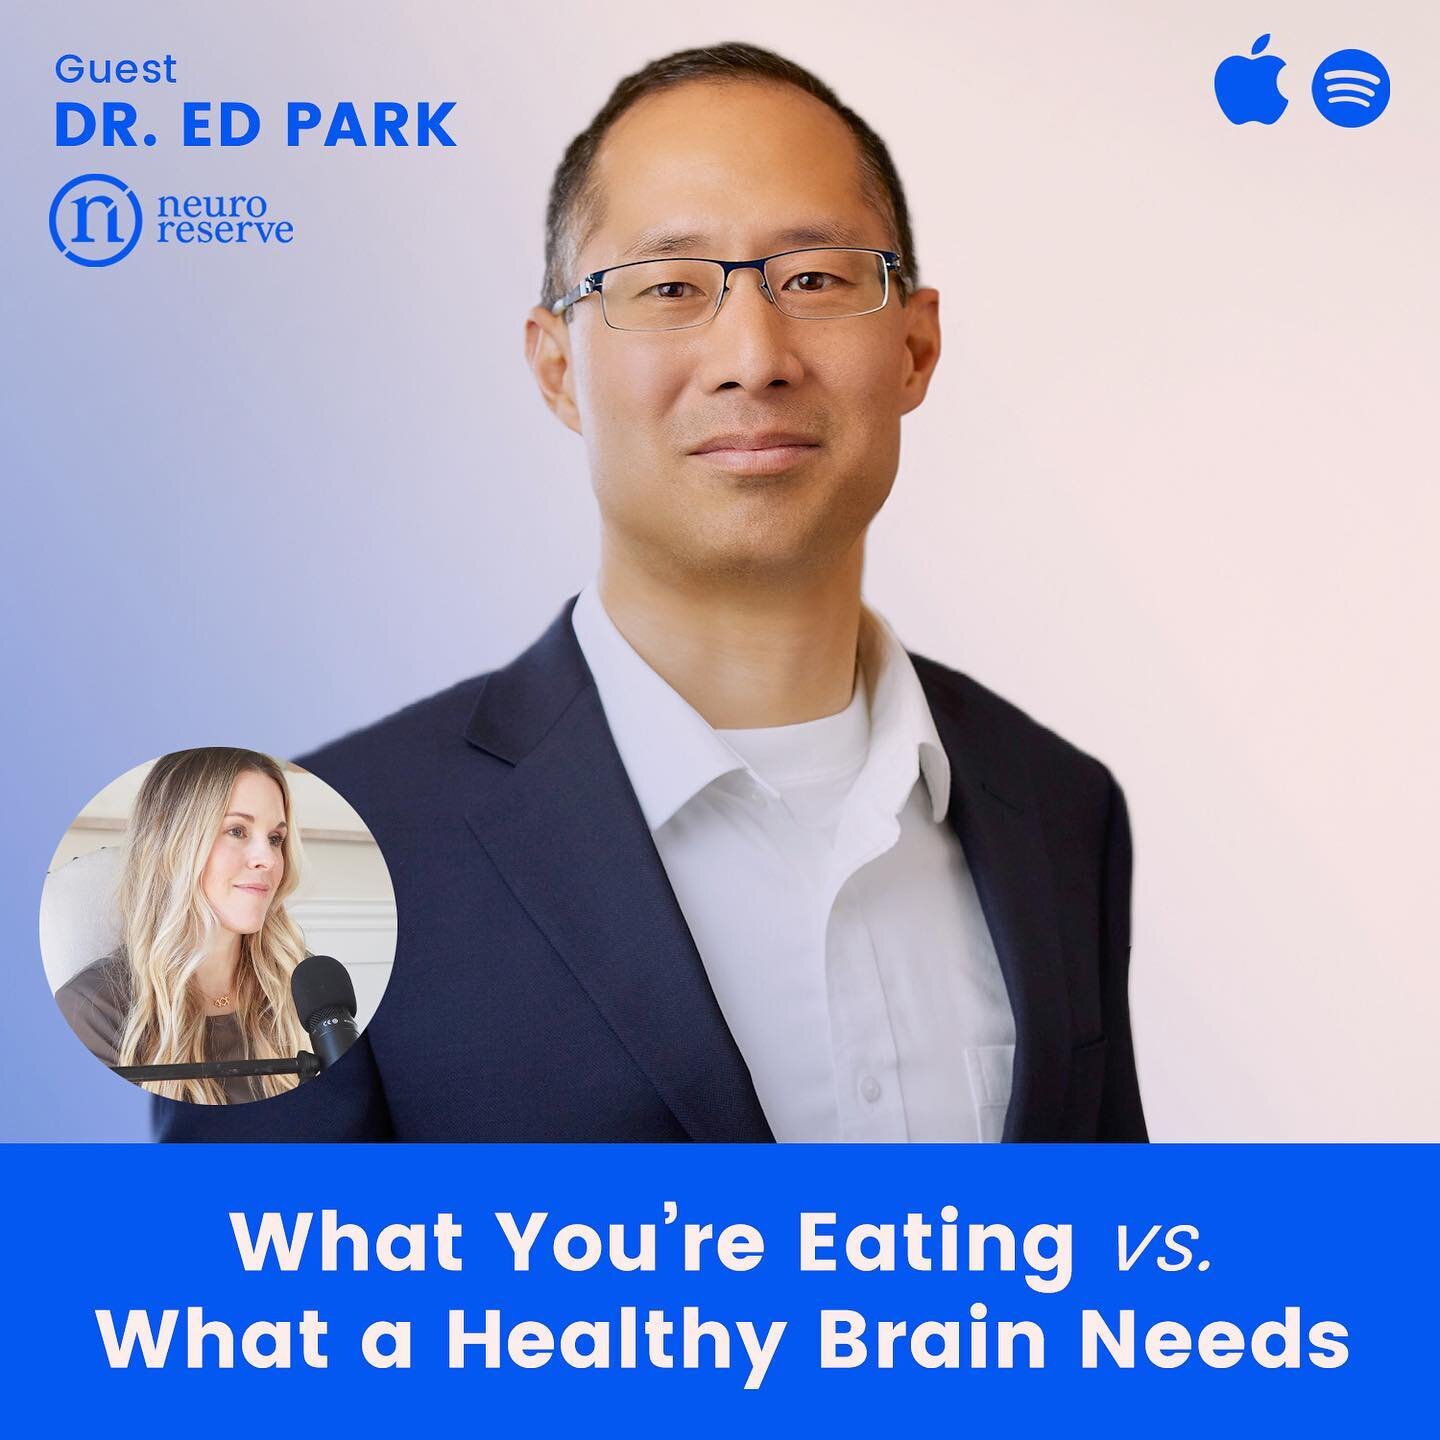 What You&rsquo;re Eating vs. What a Healthy Brain Needs 🧠🍎

Today we talk with Dr. Ed Park the founder of Neuroreserve, the company who makes the product Relevate which is a state of the art nutrition supplement for the brain designed to closed the